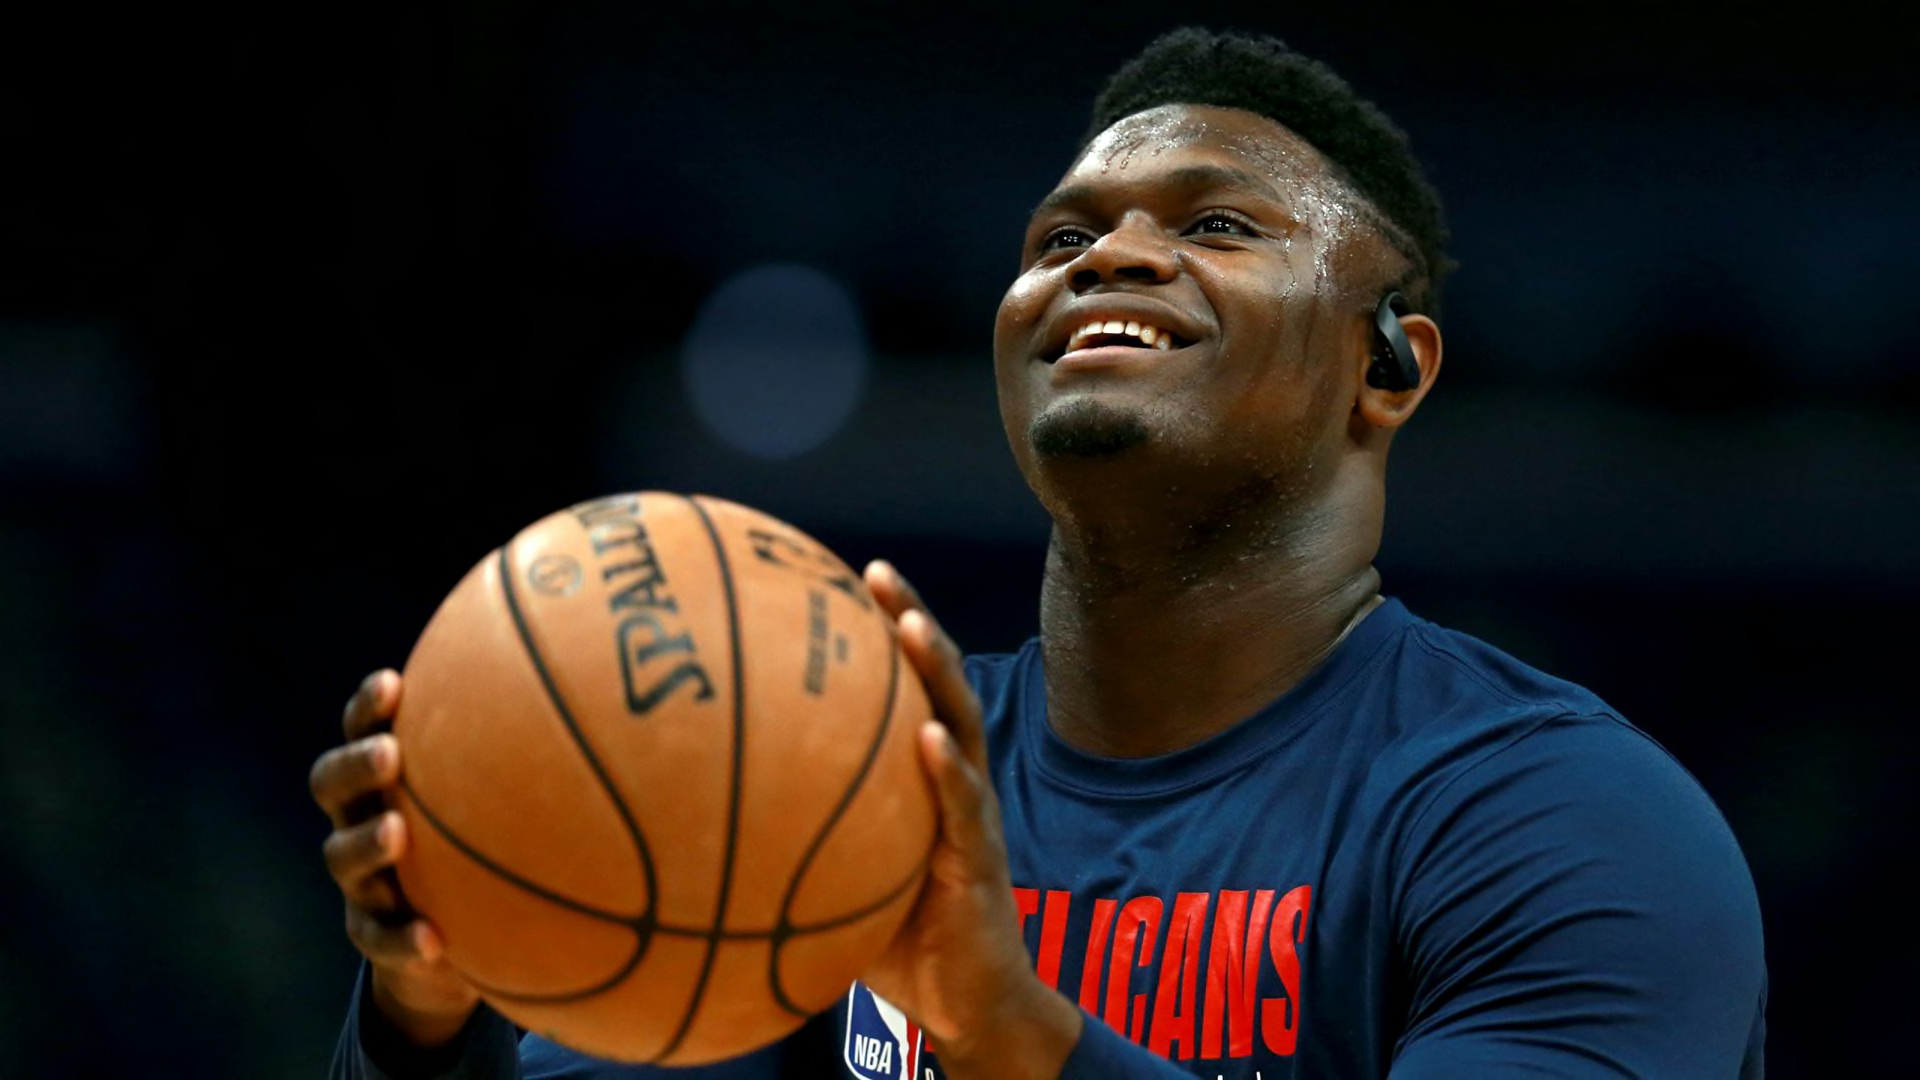 Duke Basketball Legend Zion Williamson To Be The Face Of Nba 2k21